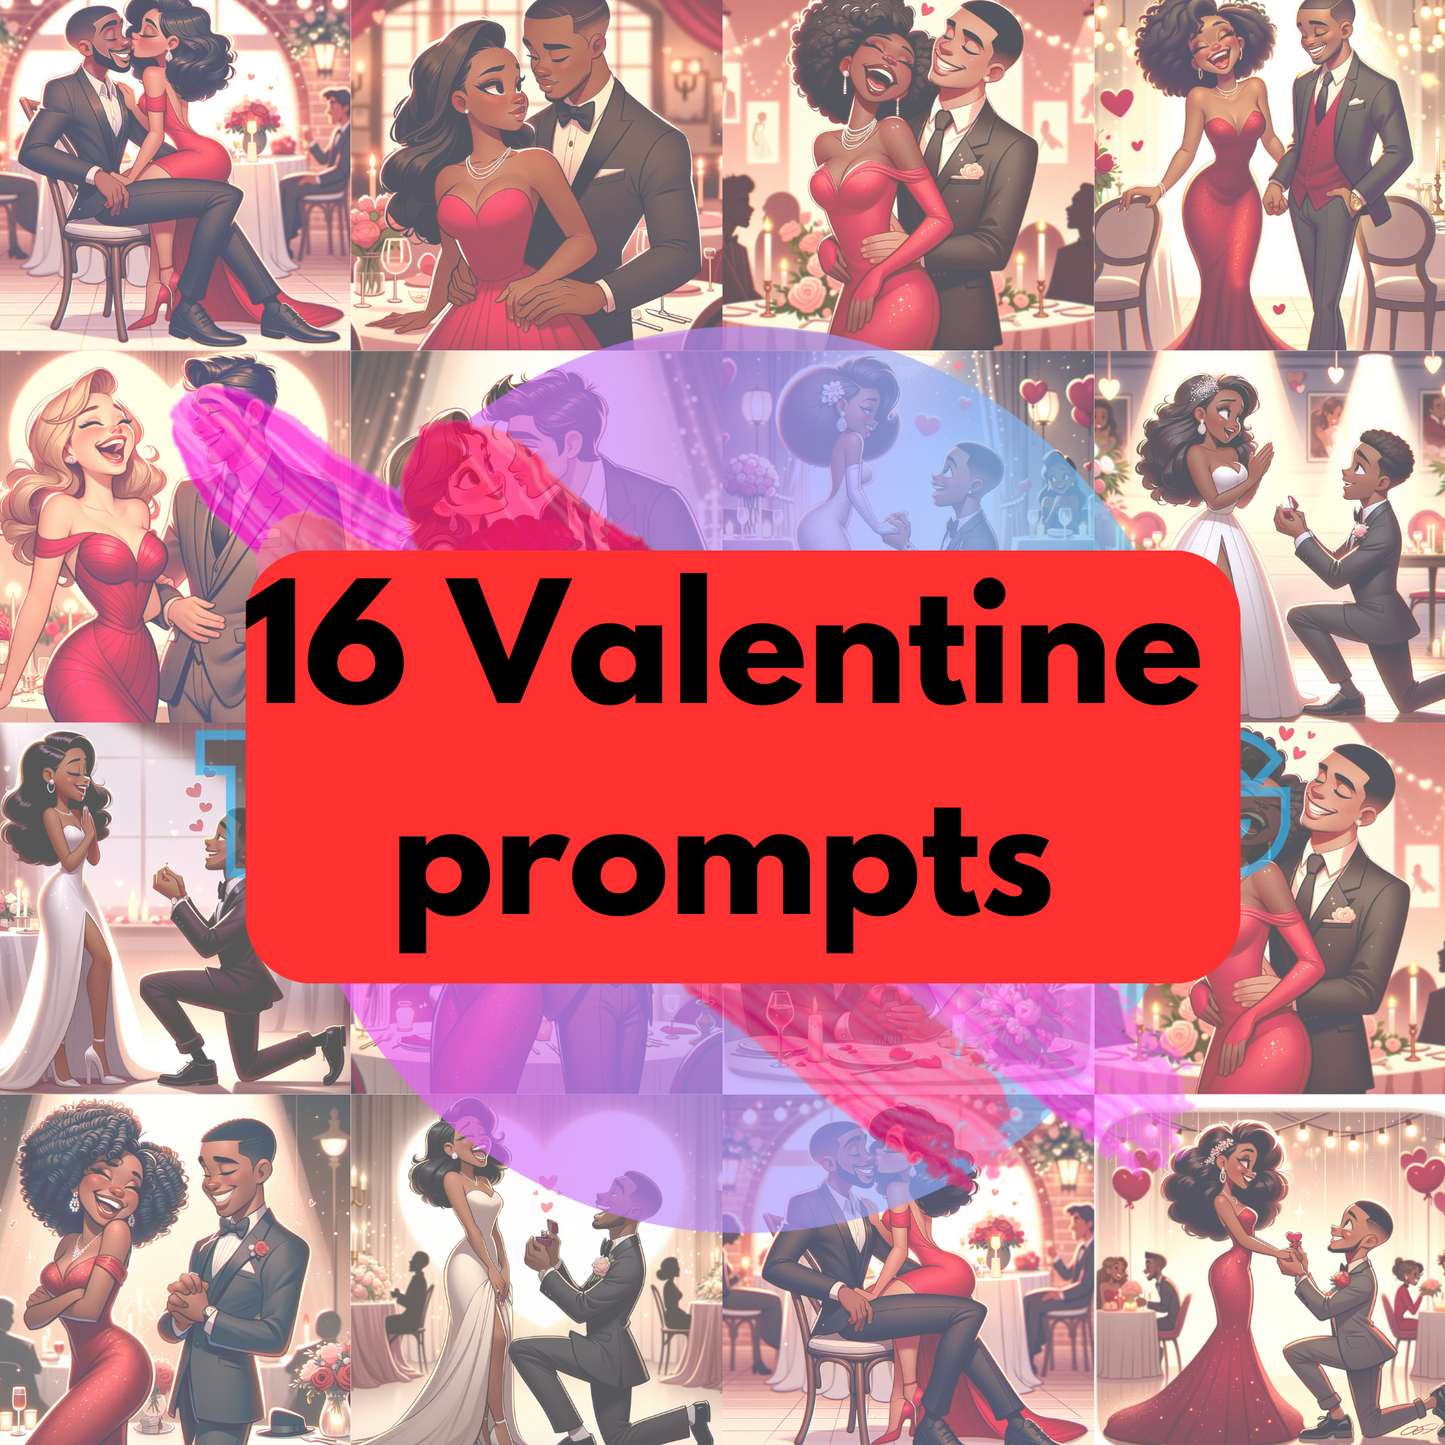 ChatGPT+DallE3 prompts of  Valentine Couples